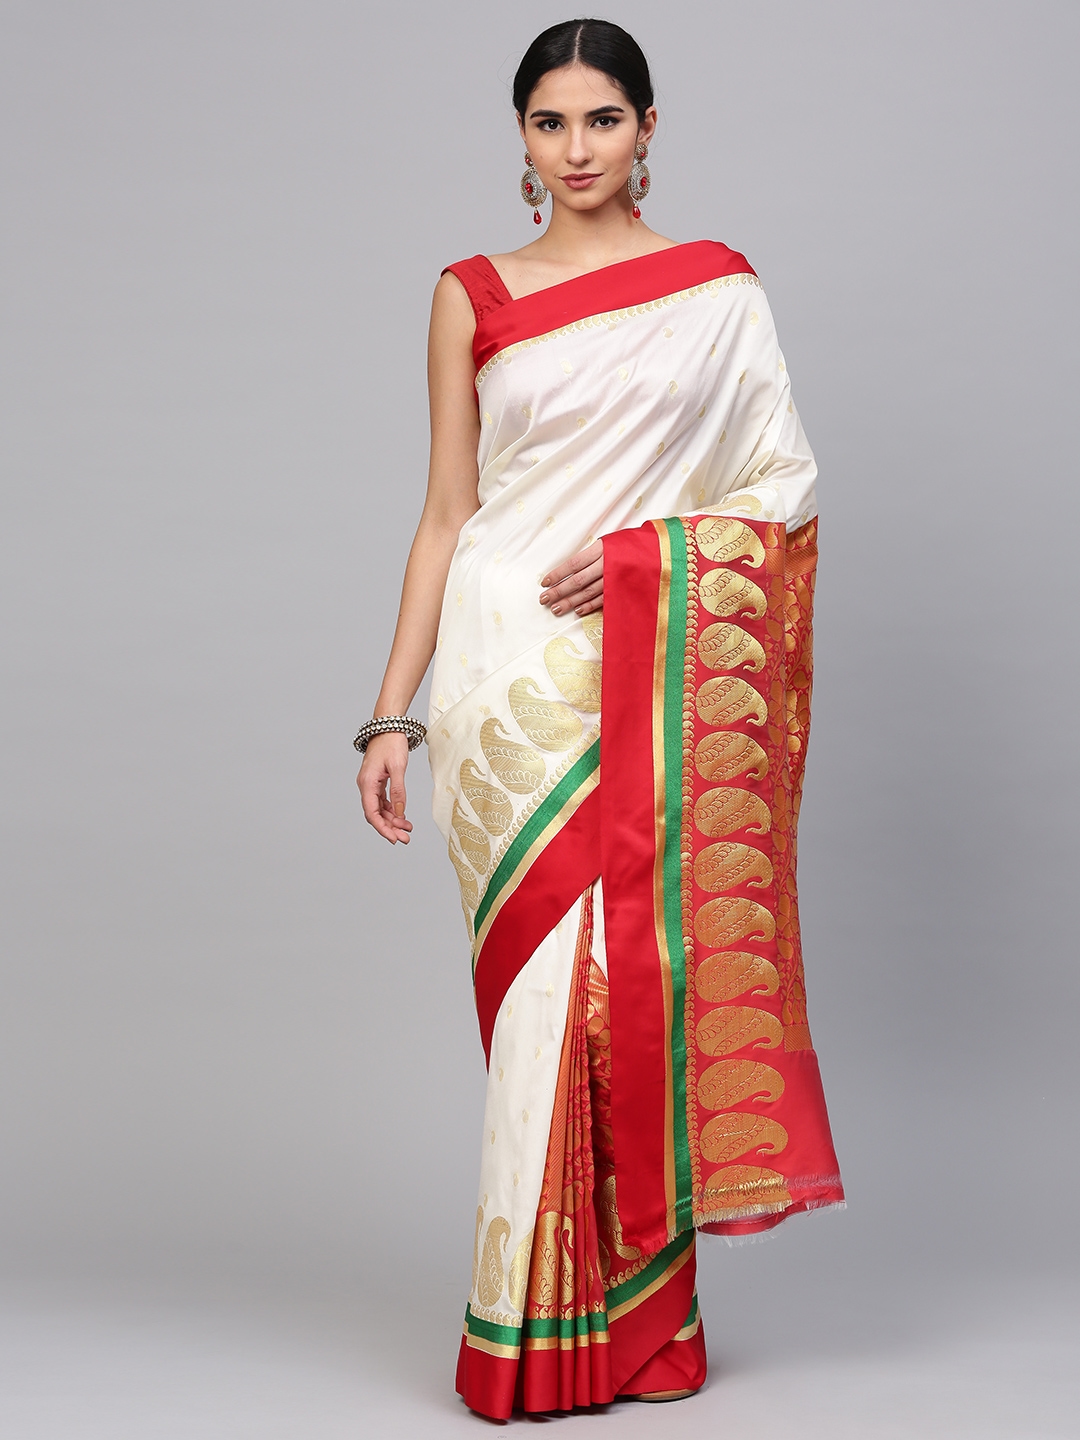 Complete Step By Step Guide To Wear Bengali Saree | Hangout Hub Blogs